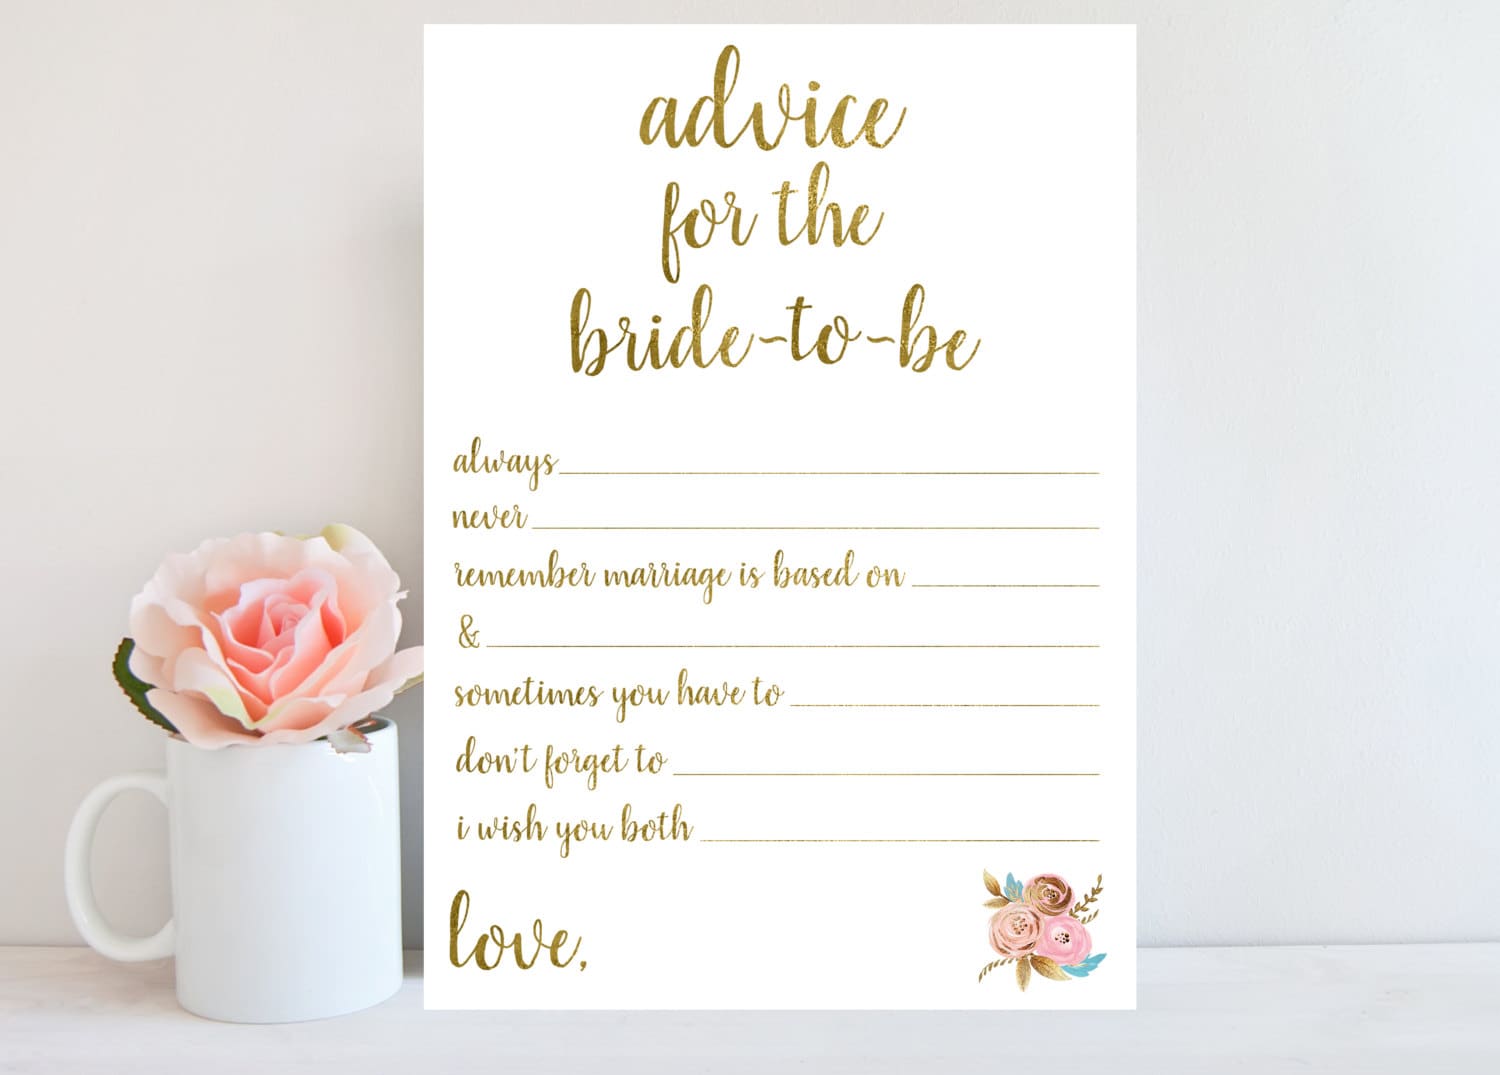 advice-for-the-bride-free-printable-cards